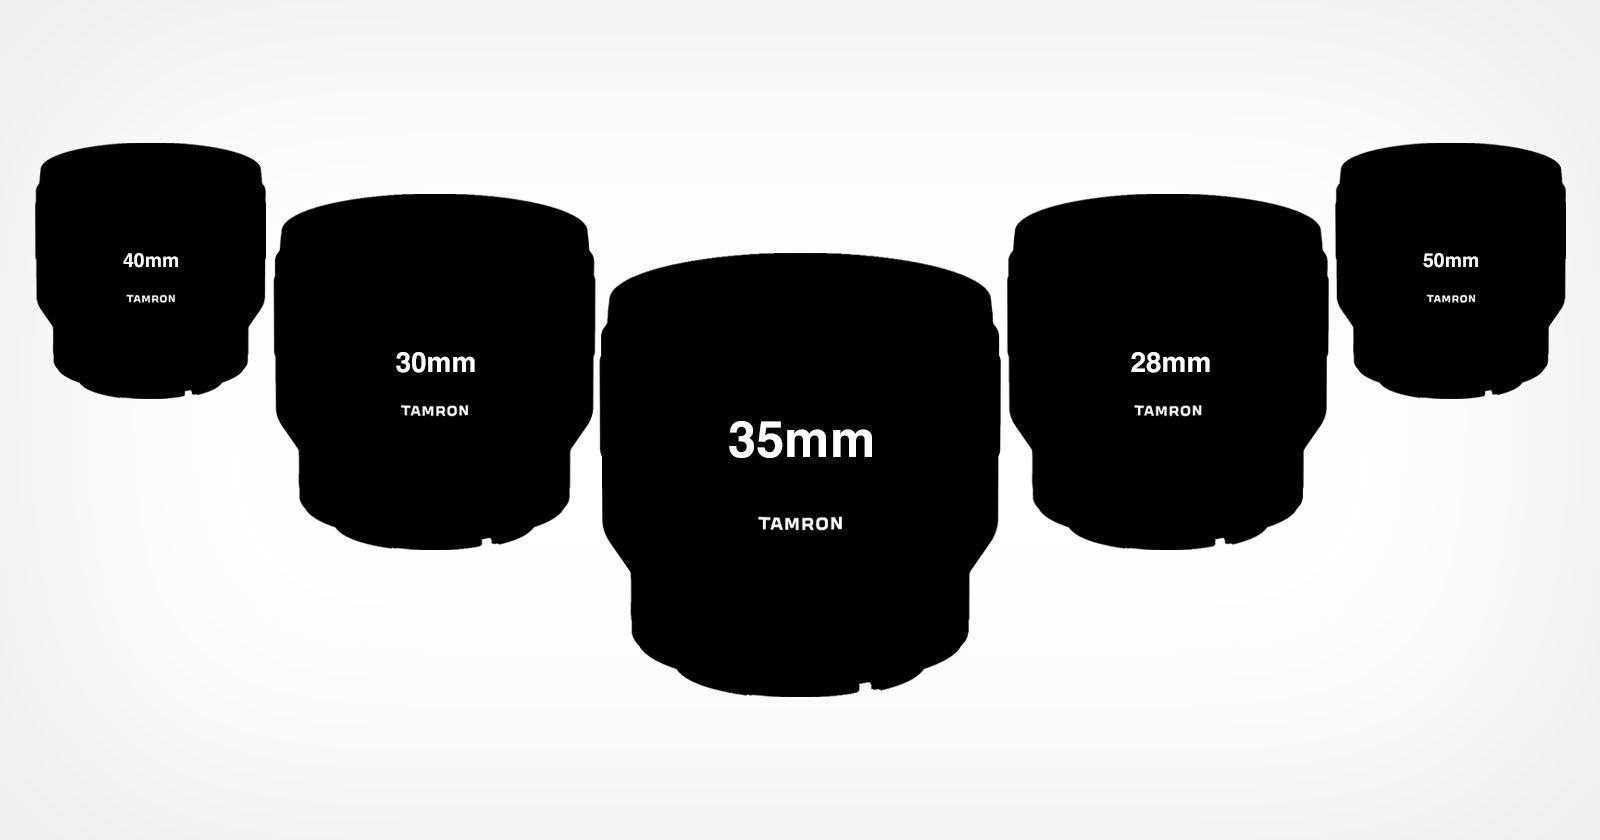 Tamron is Working on Five f/1.4 Prime Lenses for Mirrorless Cameras